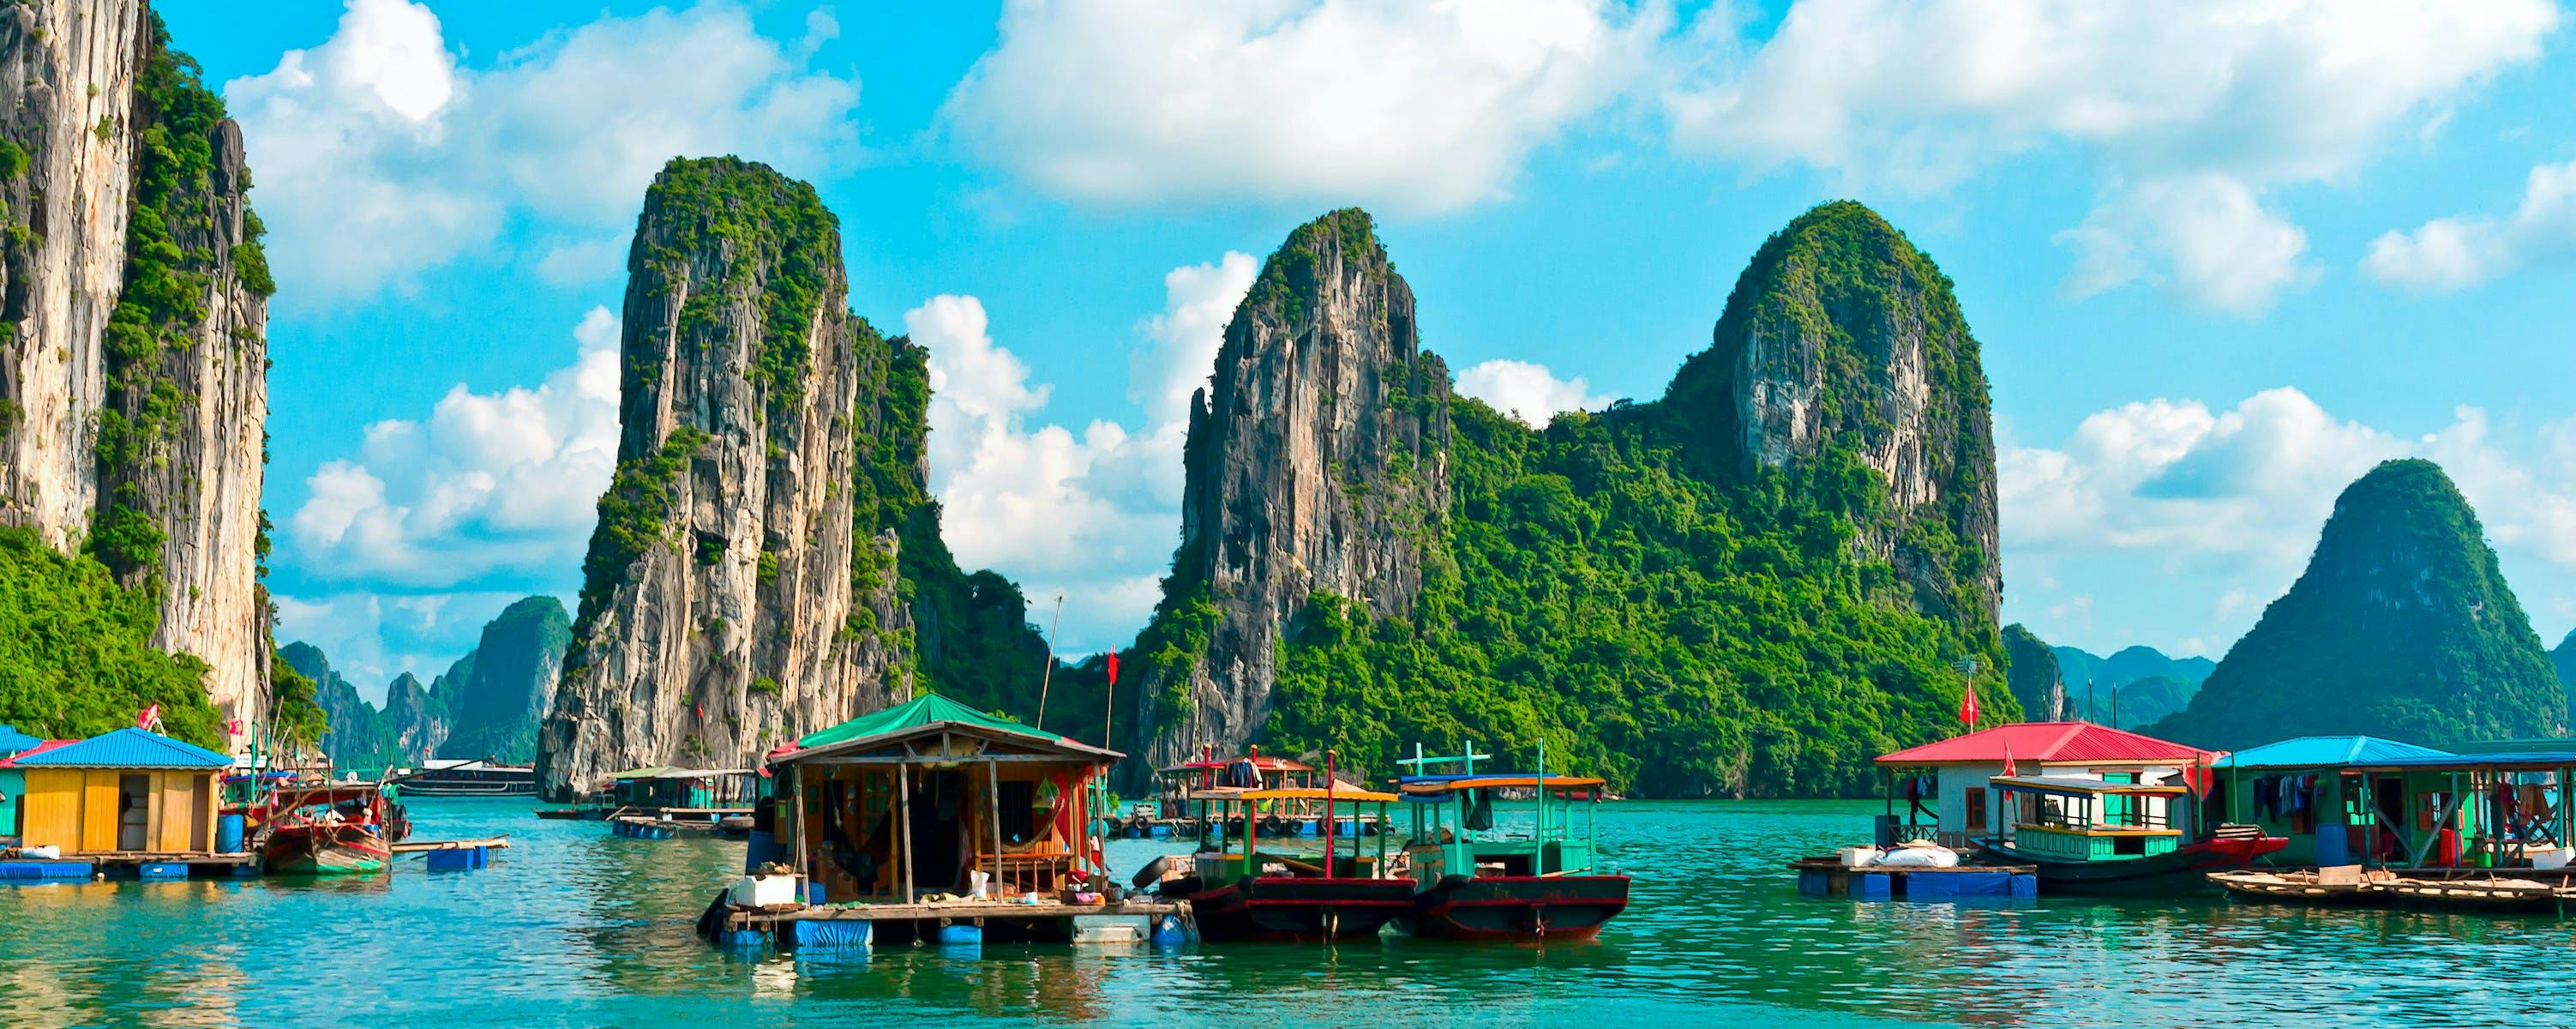 5 tips you need for travelling in Vietnam